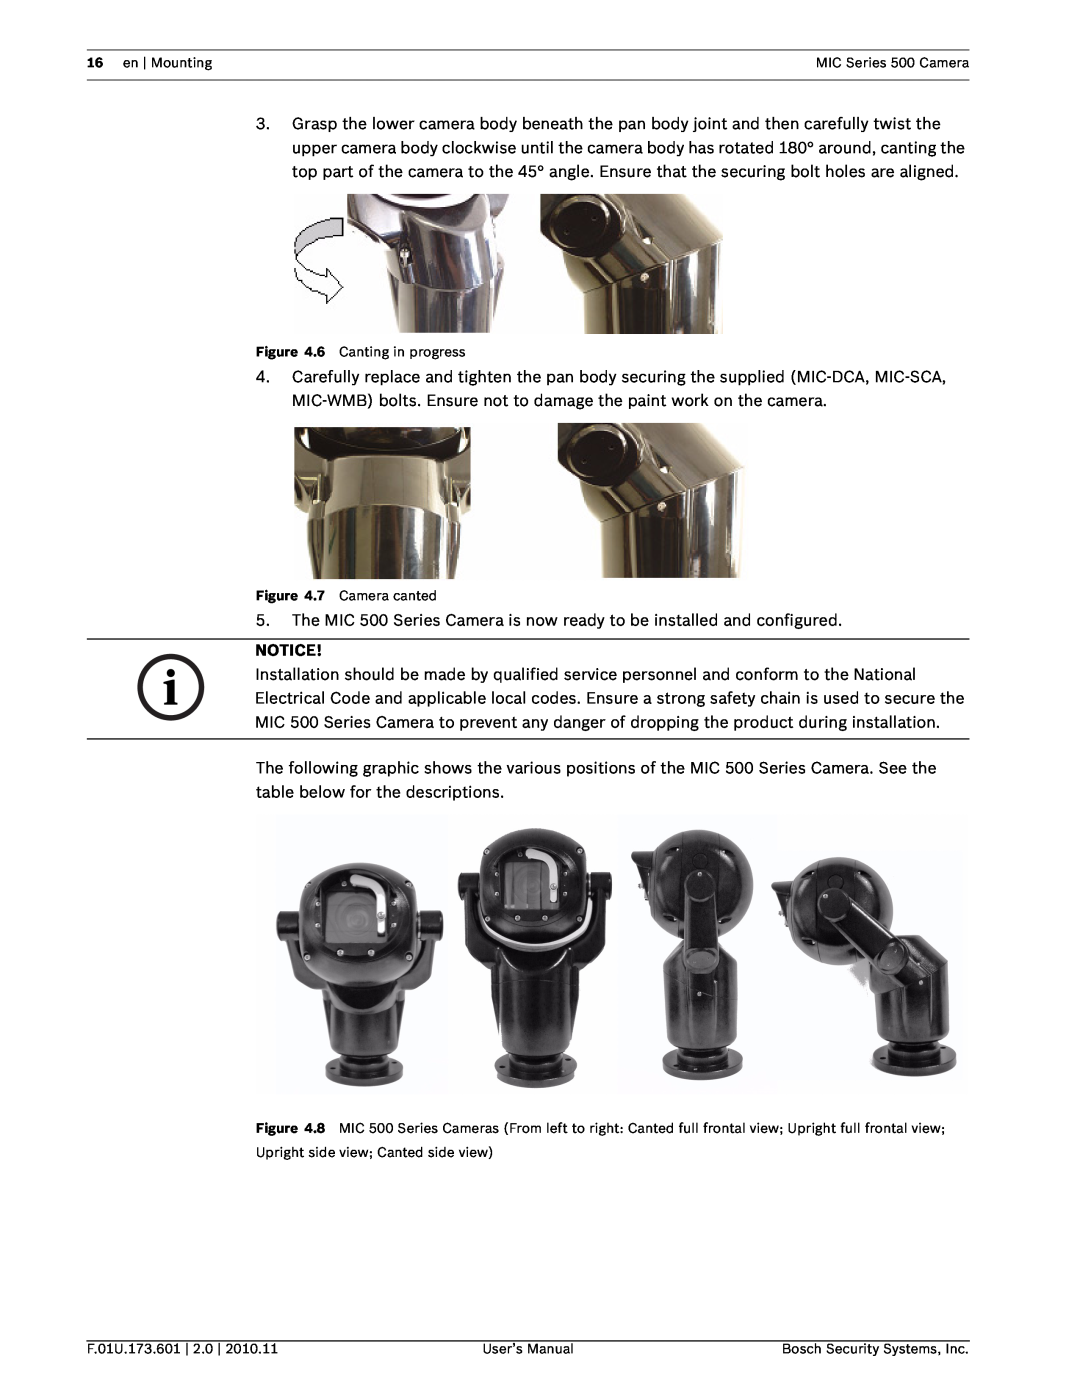 Bosch Appliances user manual en Mounting, MIC Series 500 Camera, 6 Canting in progress, 7 Camera canted, F.01U.173.601 